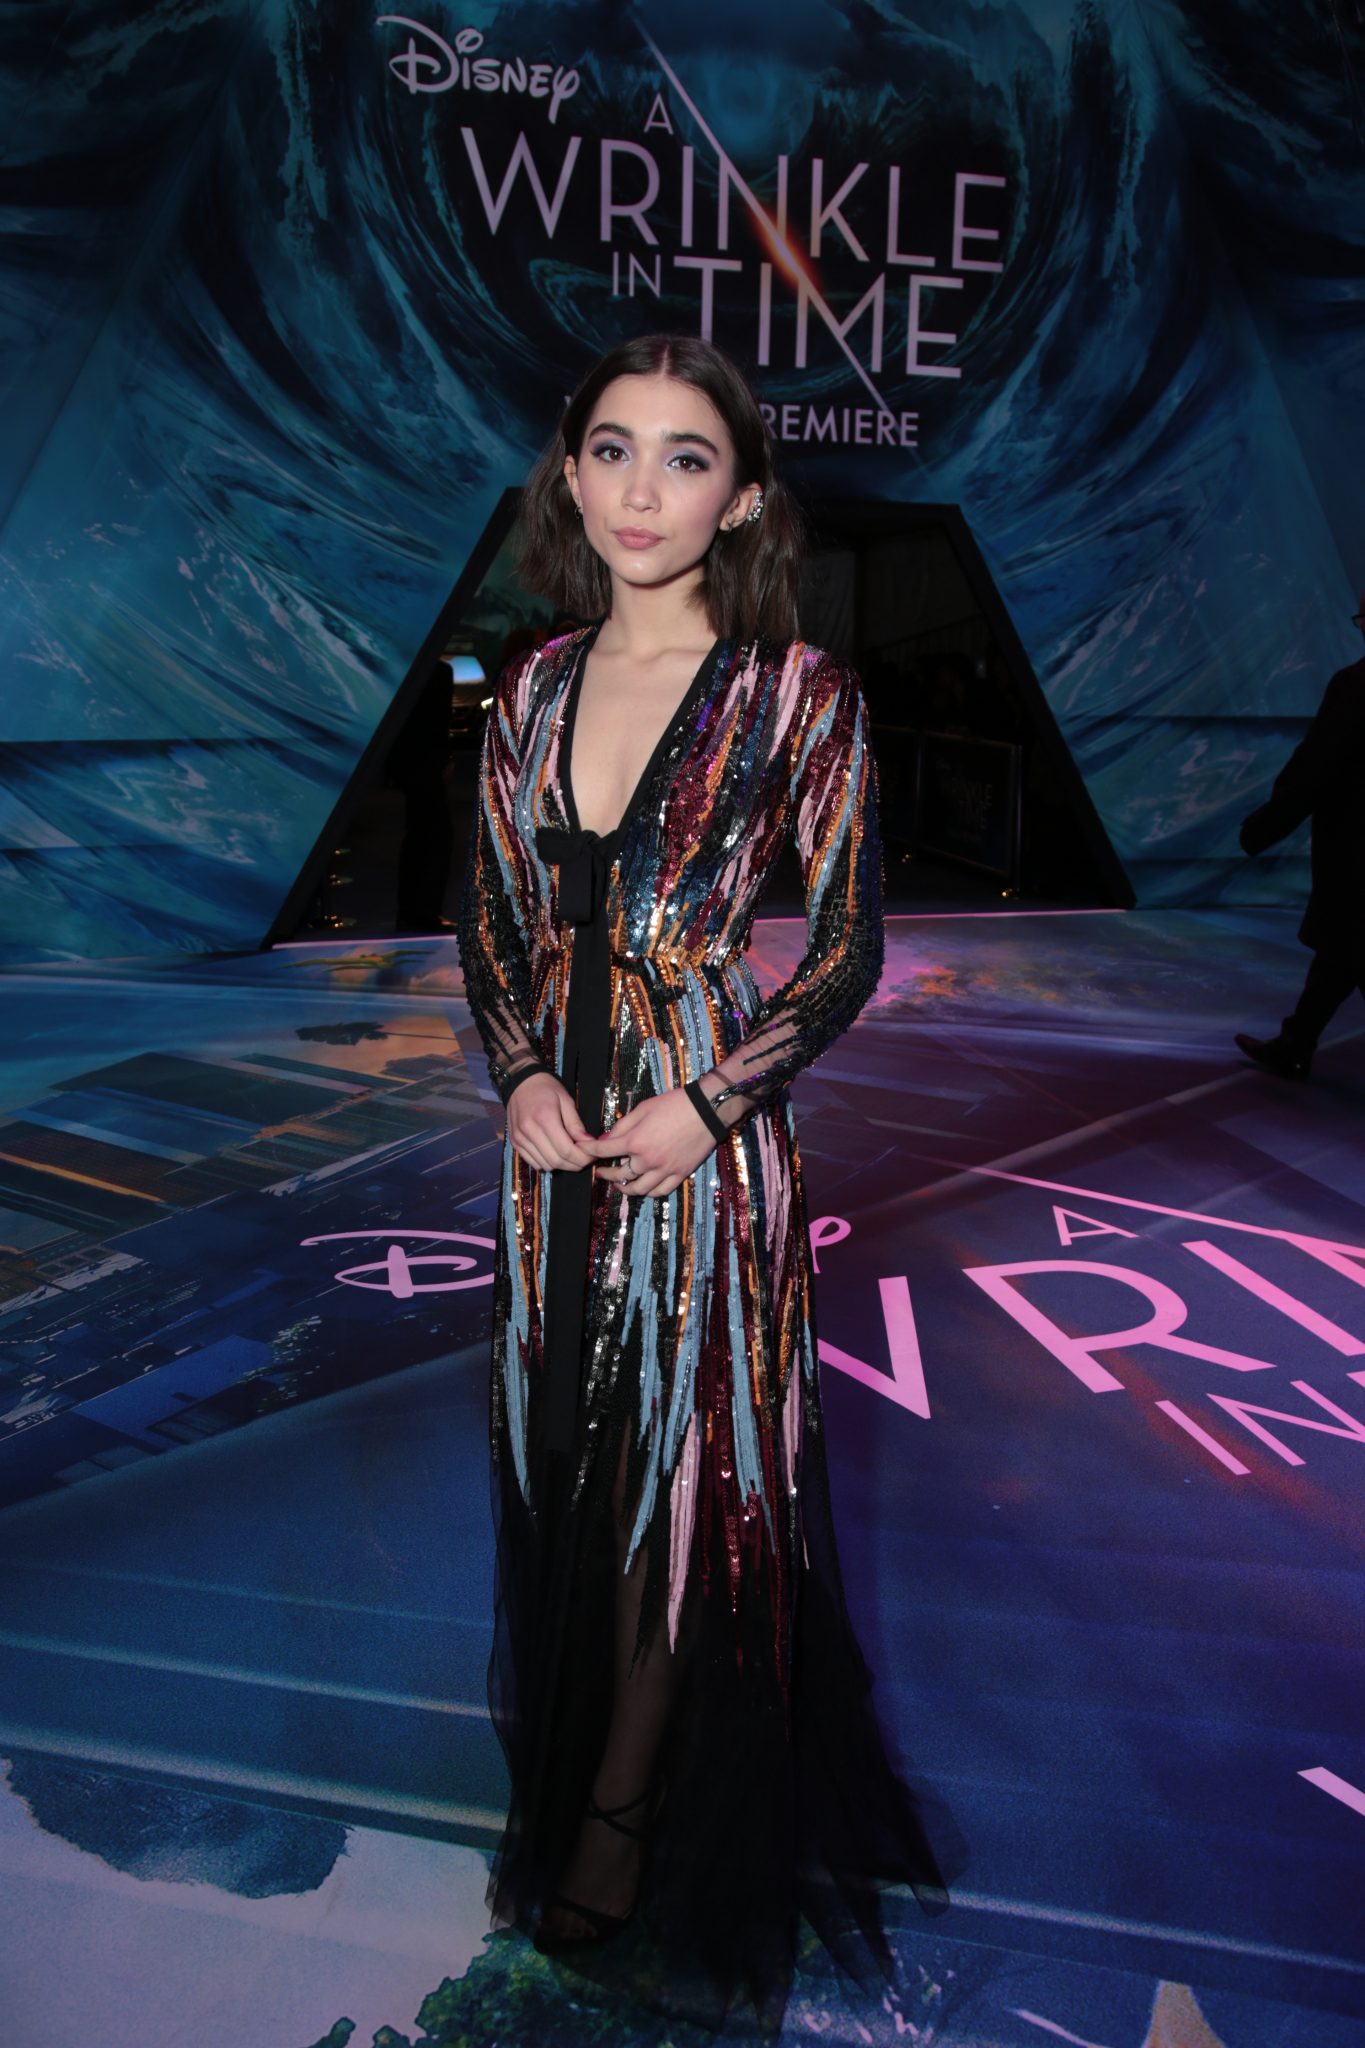 One On One With Rowan Blanchard From A Wrinkle In Time